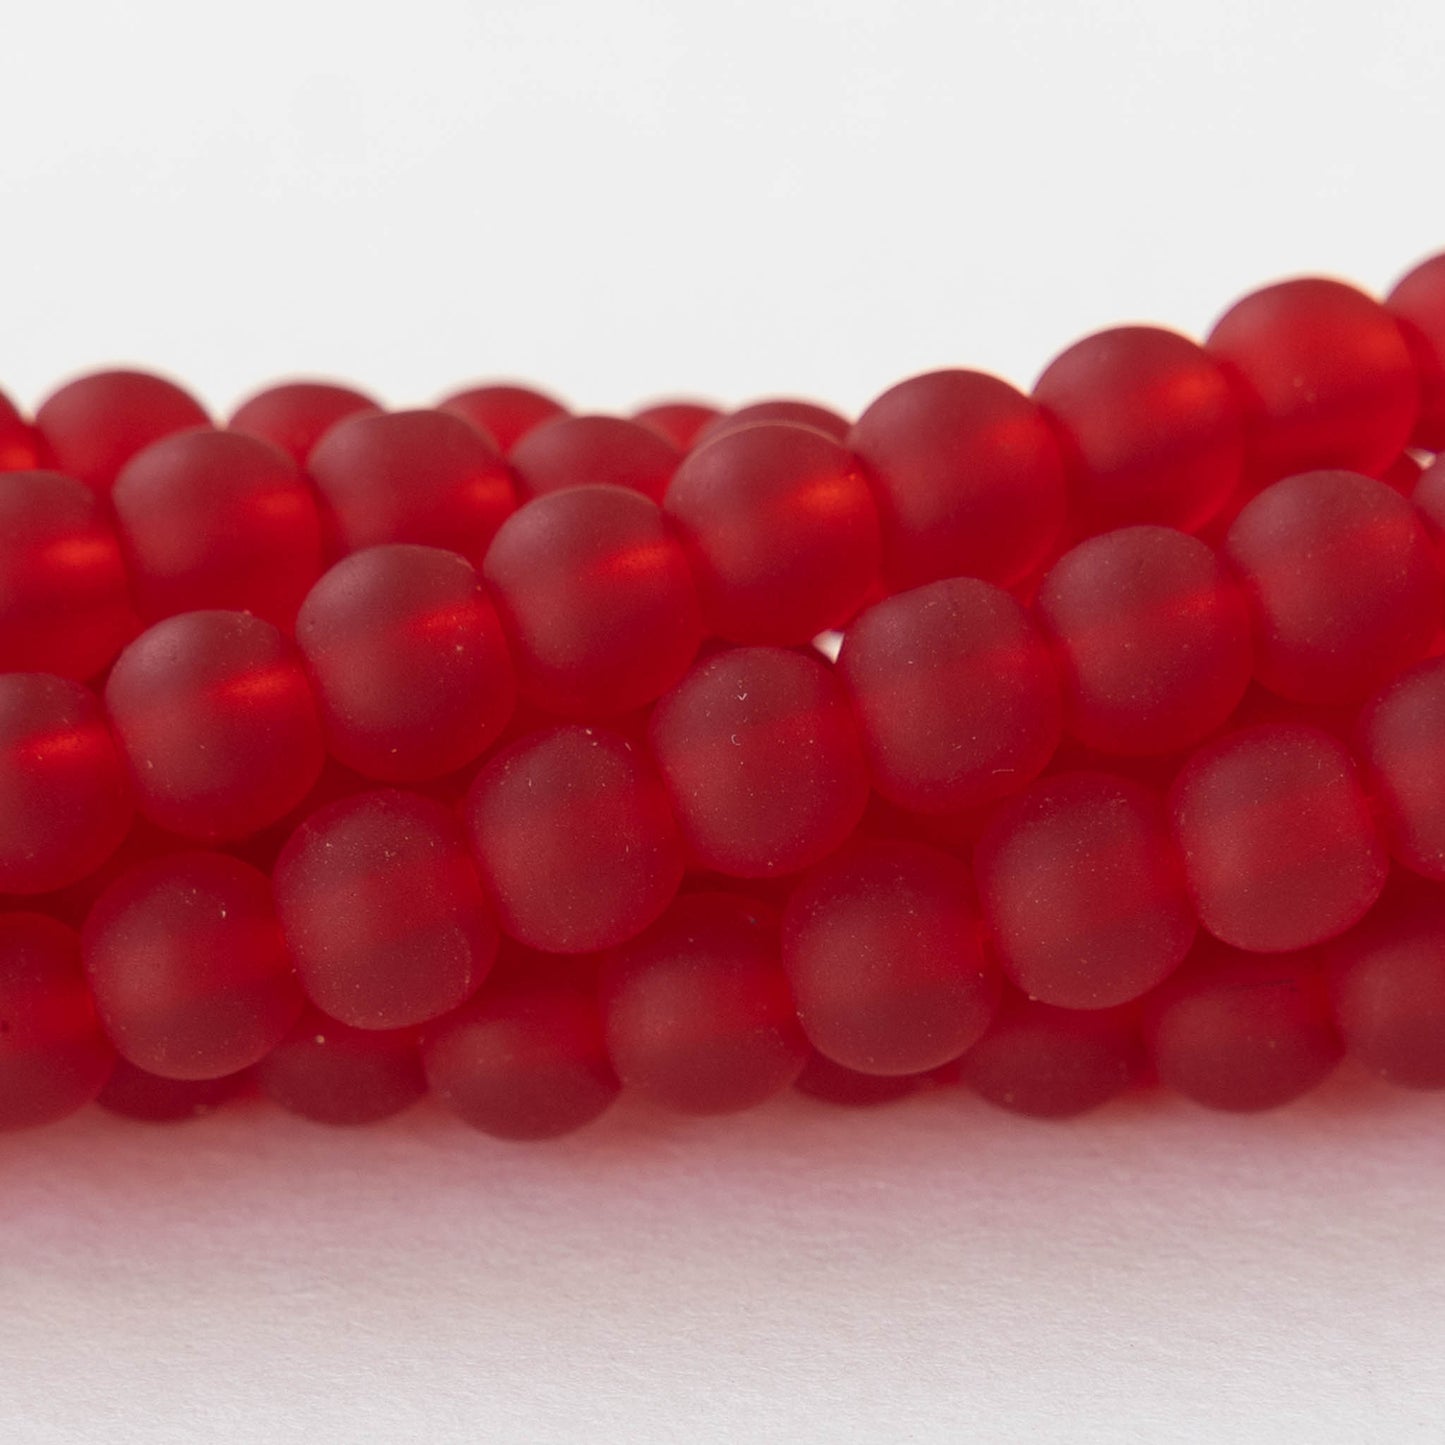 6mm Frosted Glass Round Beads - Red - 16 Inches